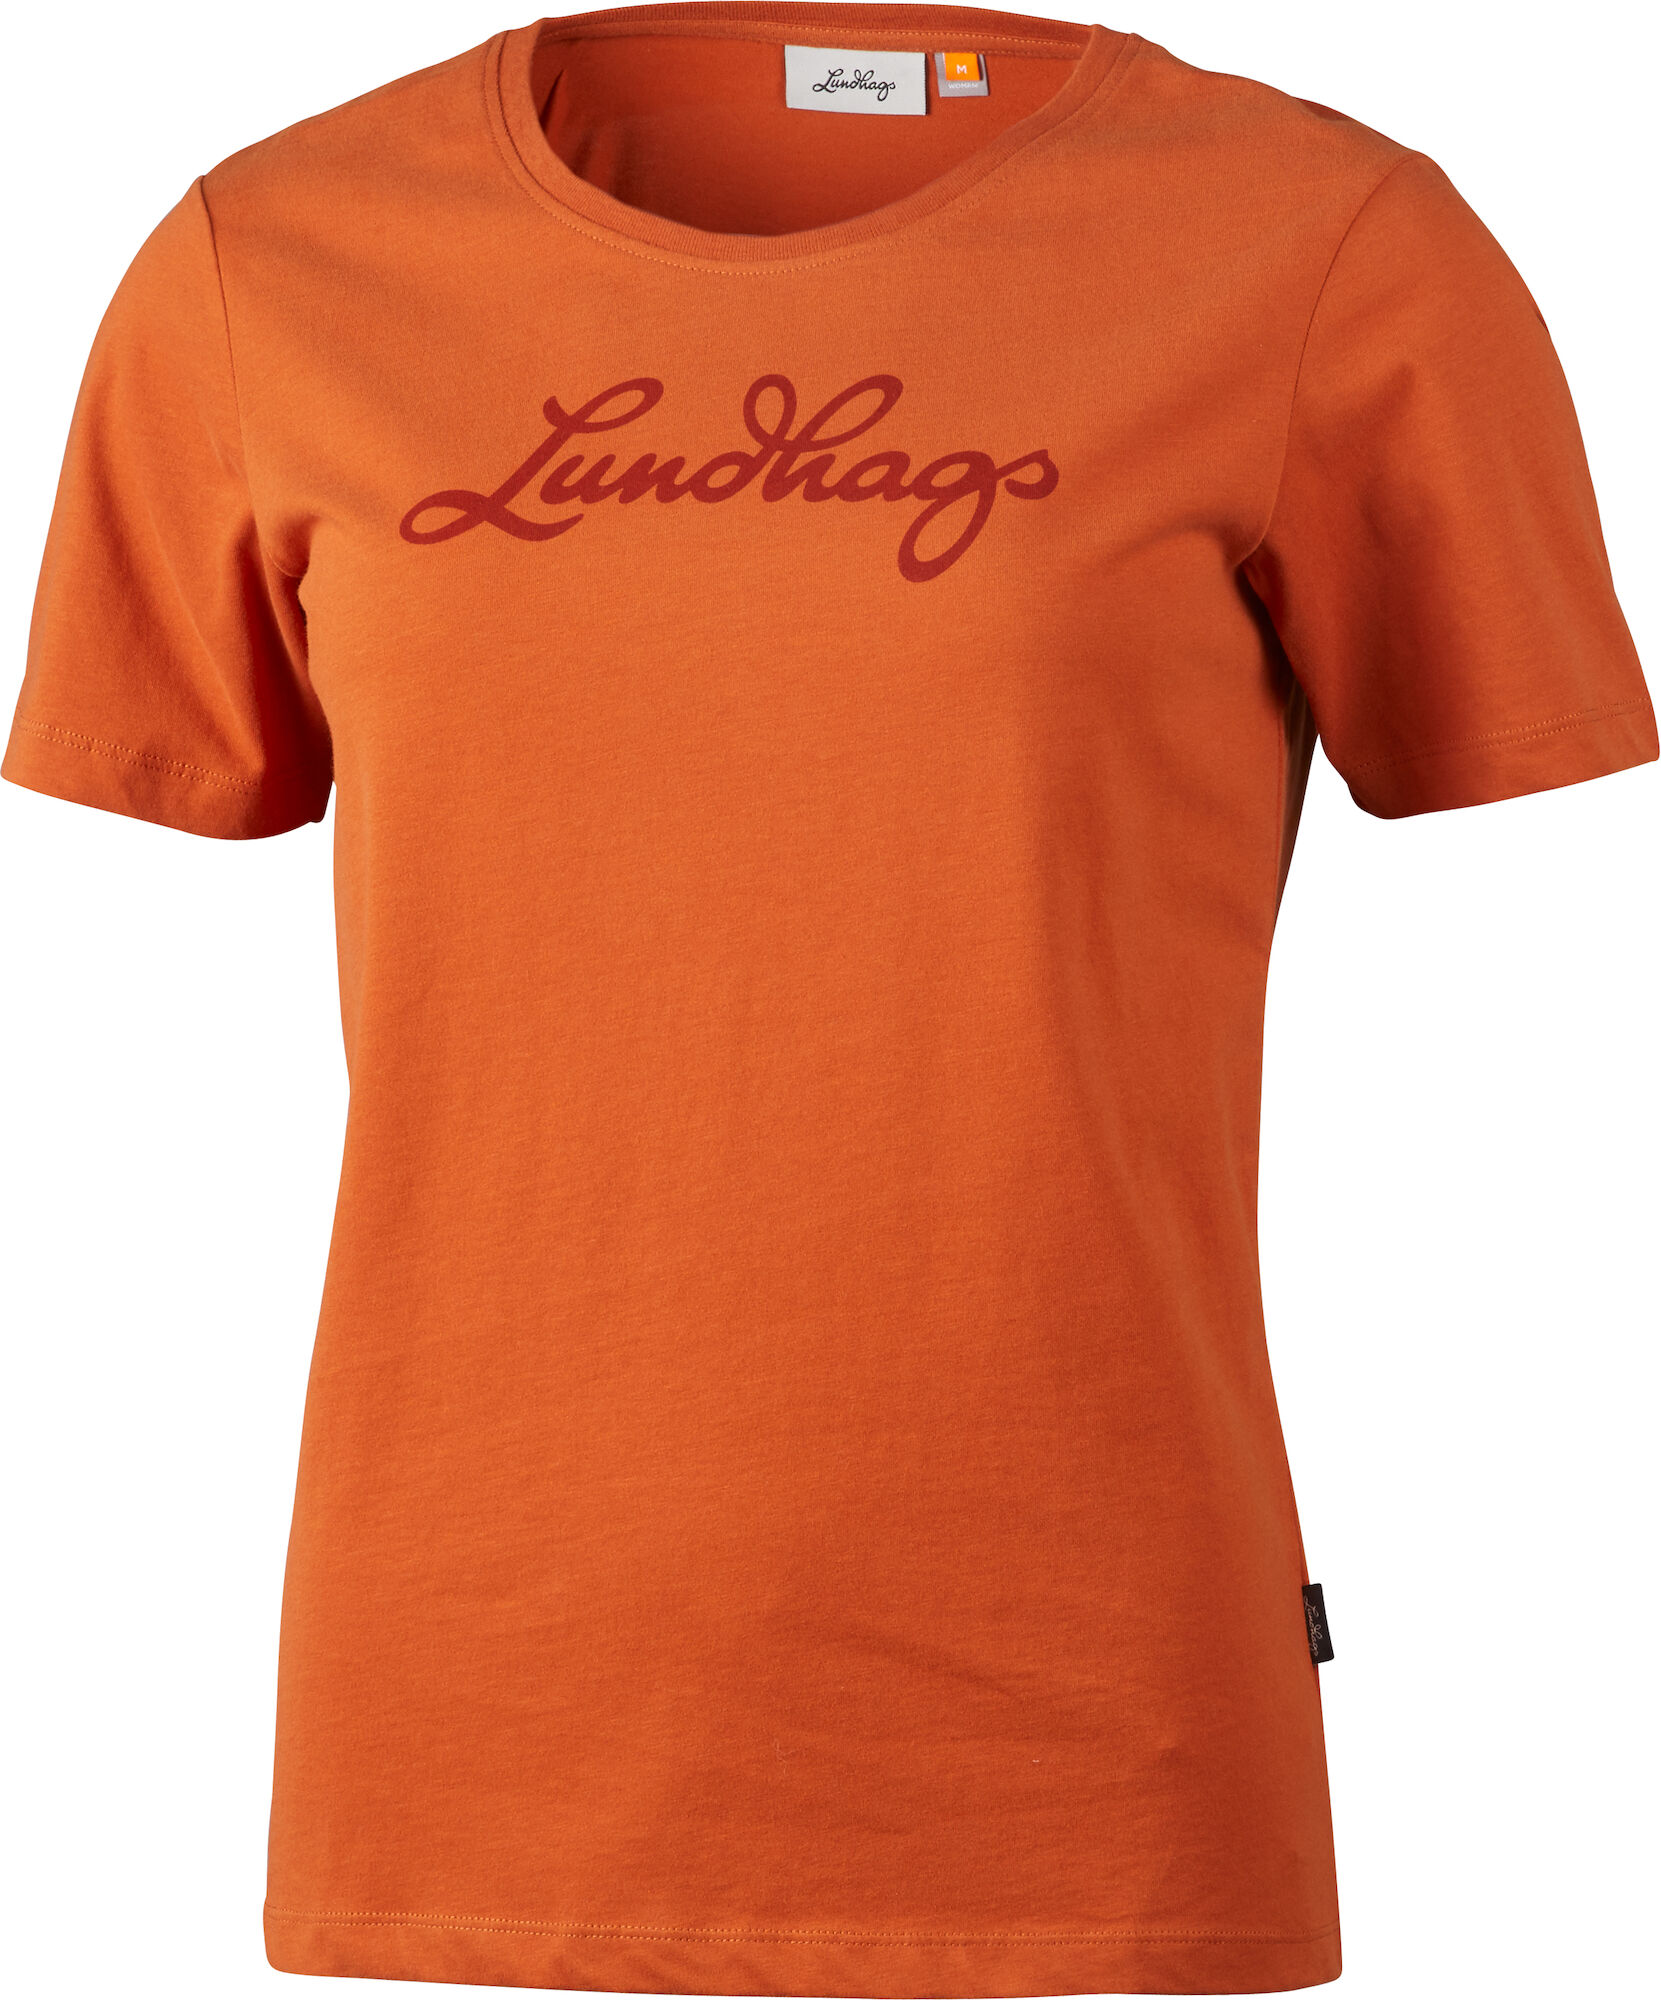 Lundhags Ws Tee Amber